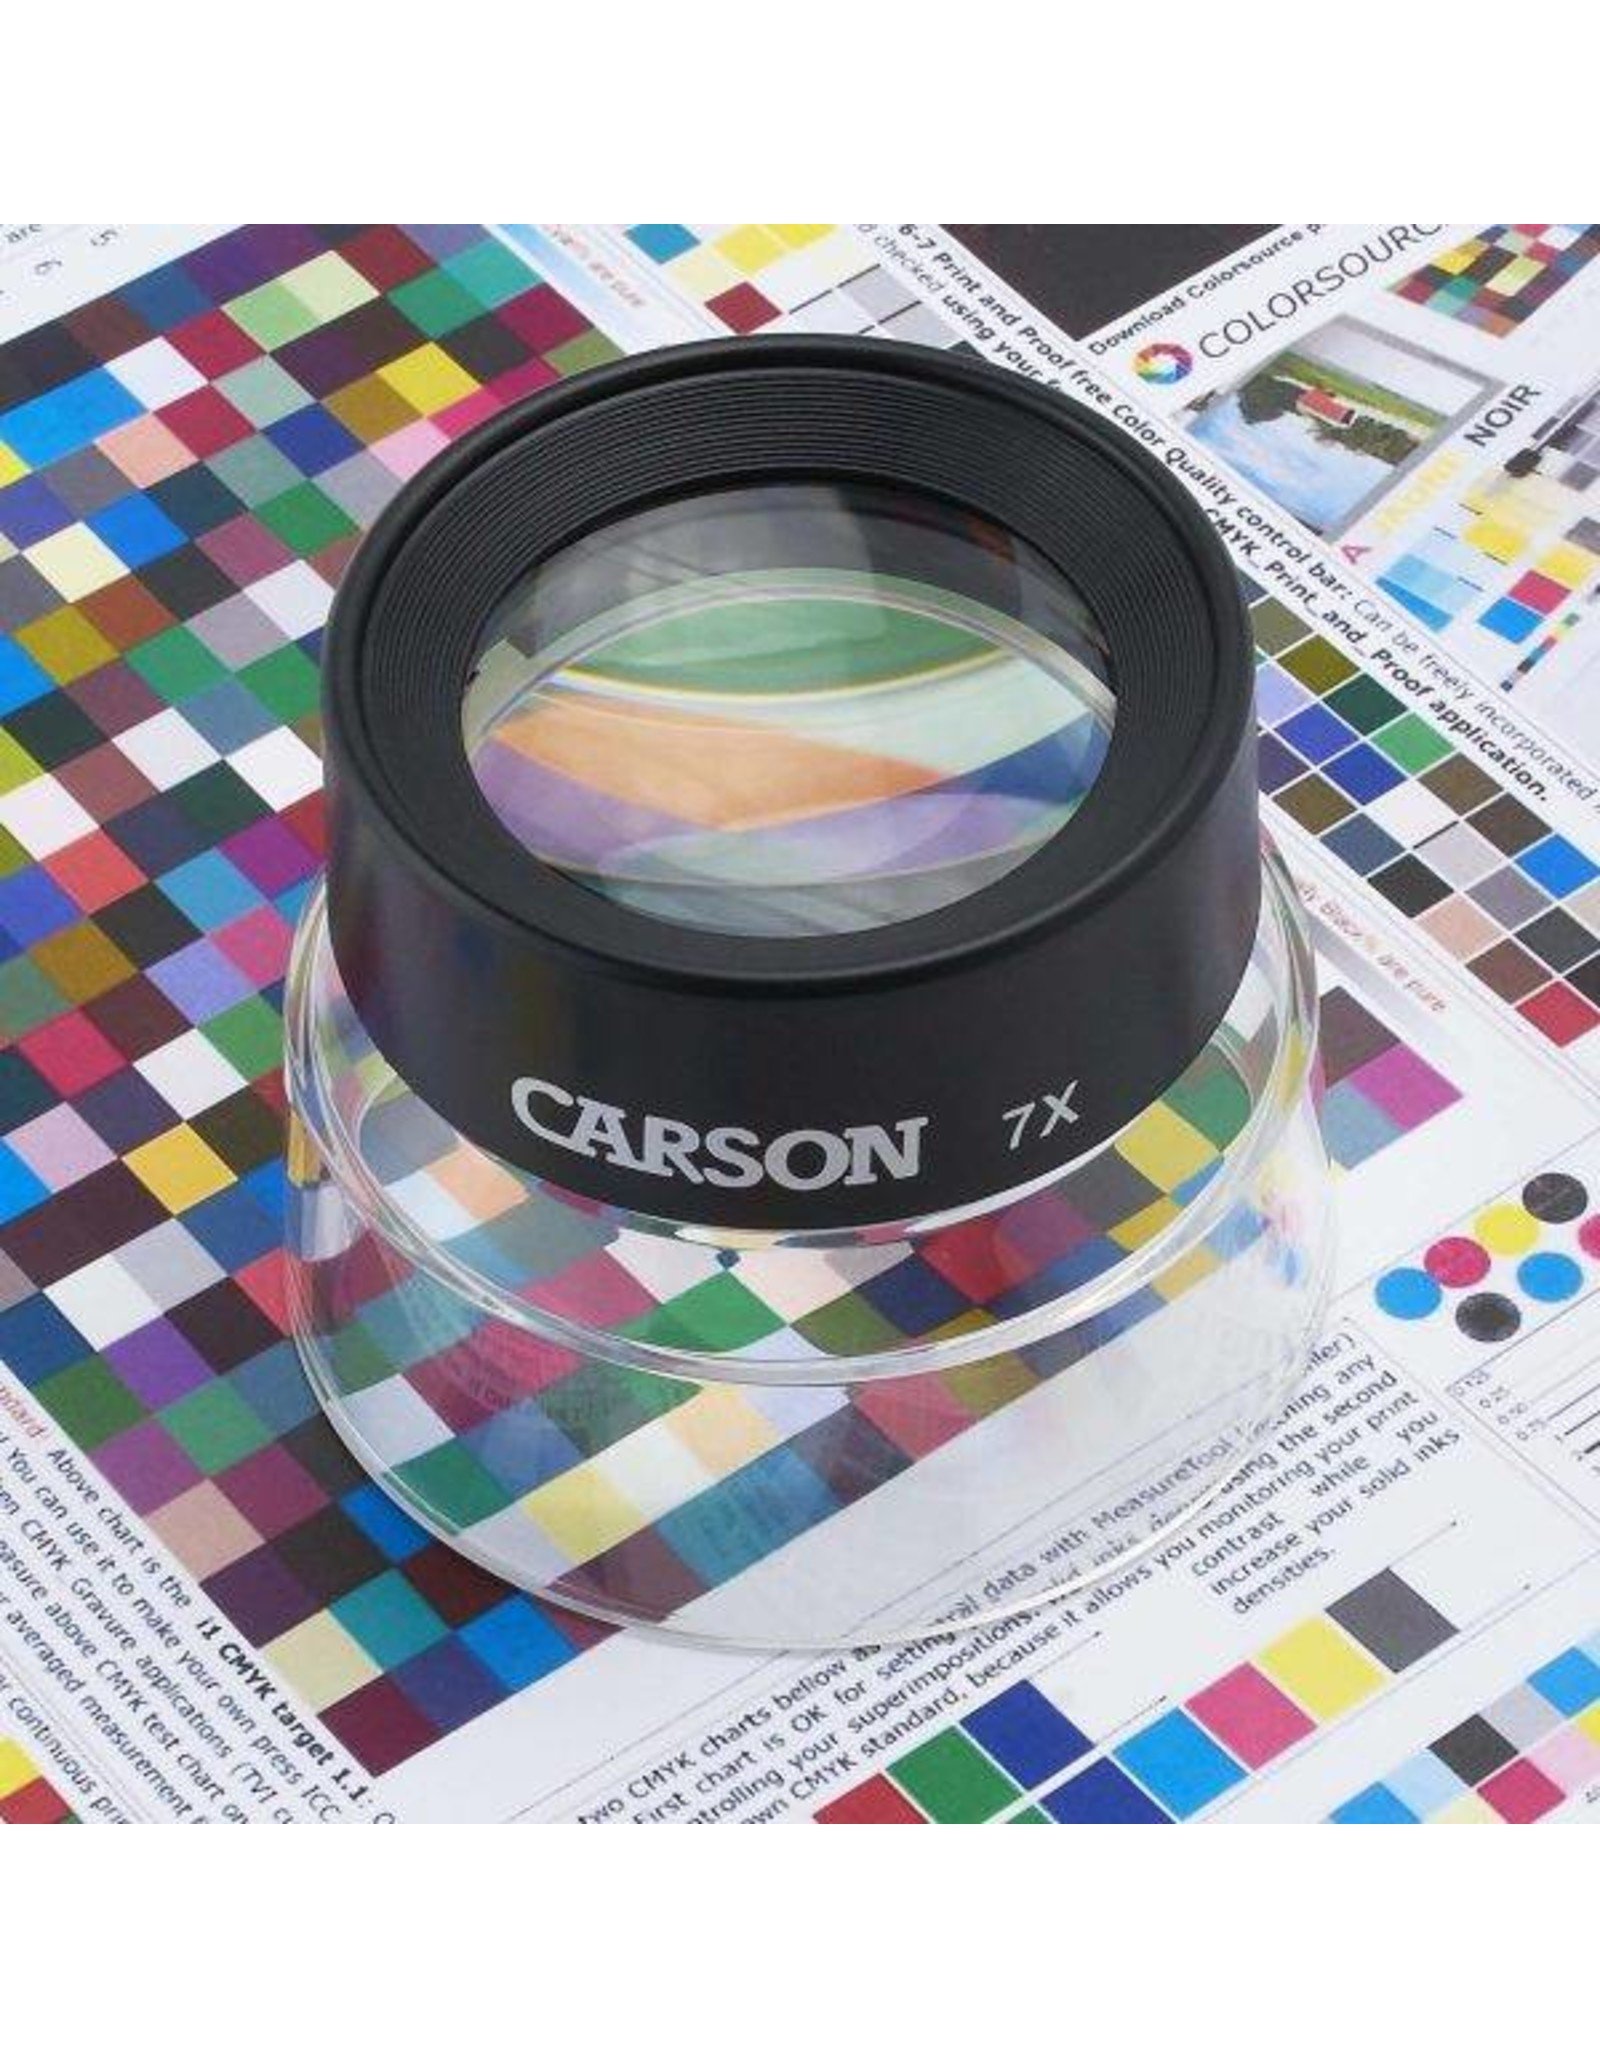 Carson Carson LL-77 7x Power Stand Magnifier Loupe